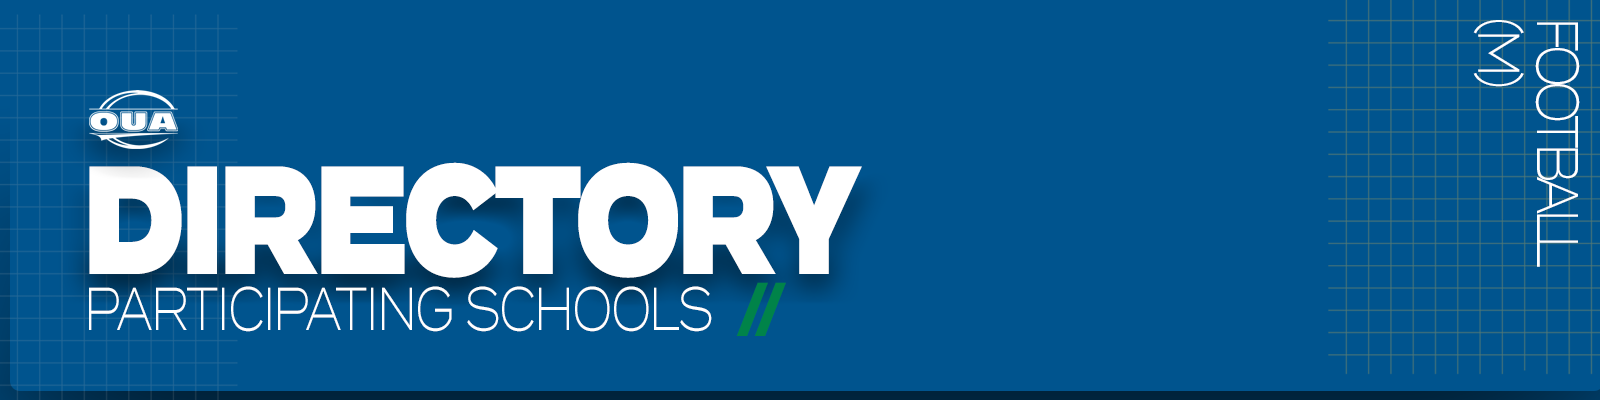 Predominantly blue graphic with large white text on the left side that reads 'Directory, Participating Schools' and small white vertical text on the right side that reads 'Football'